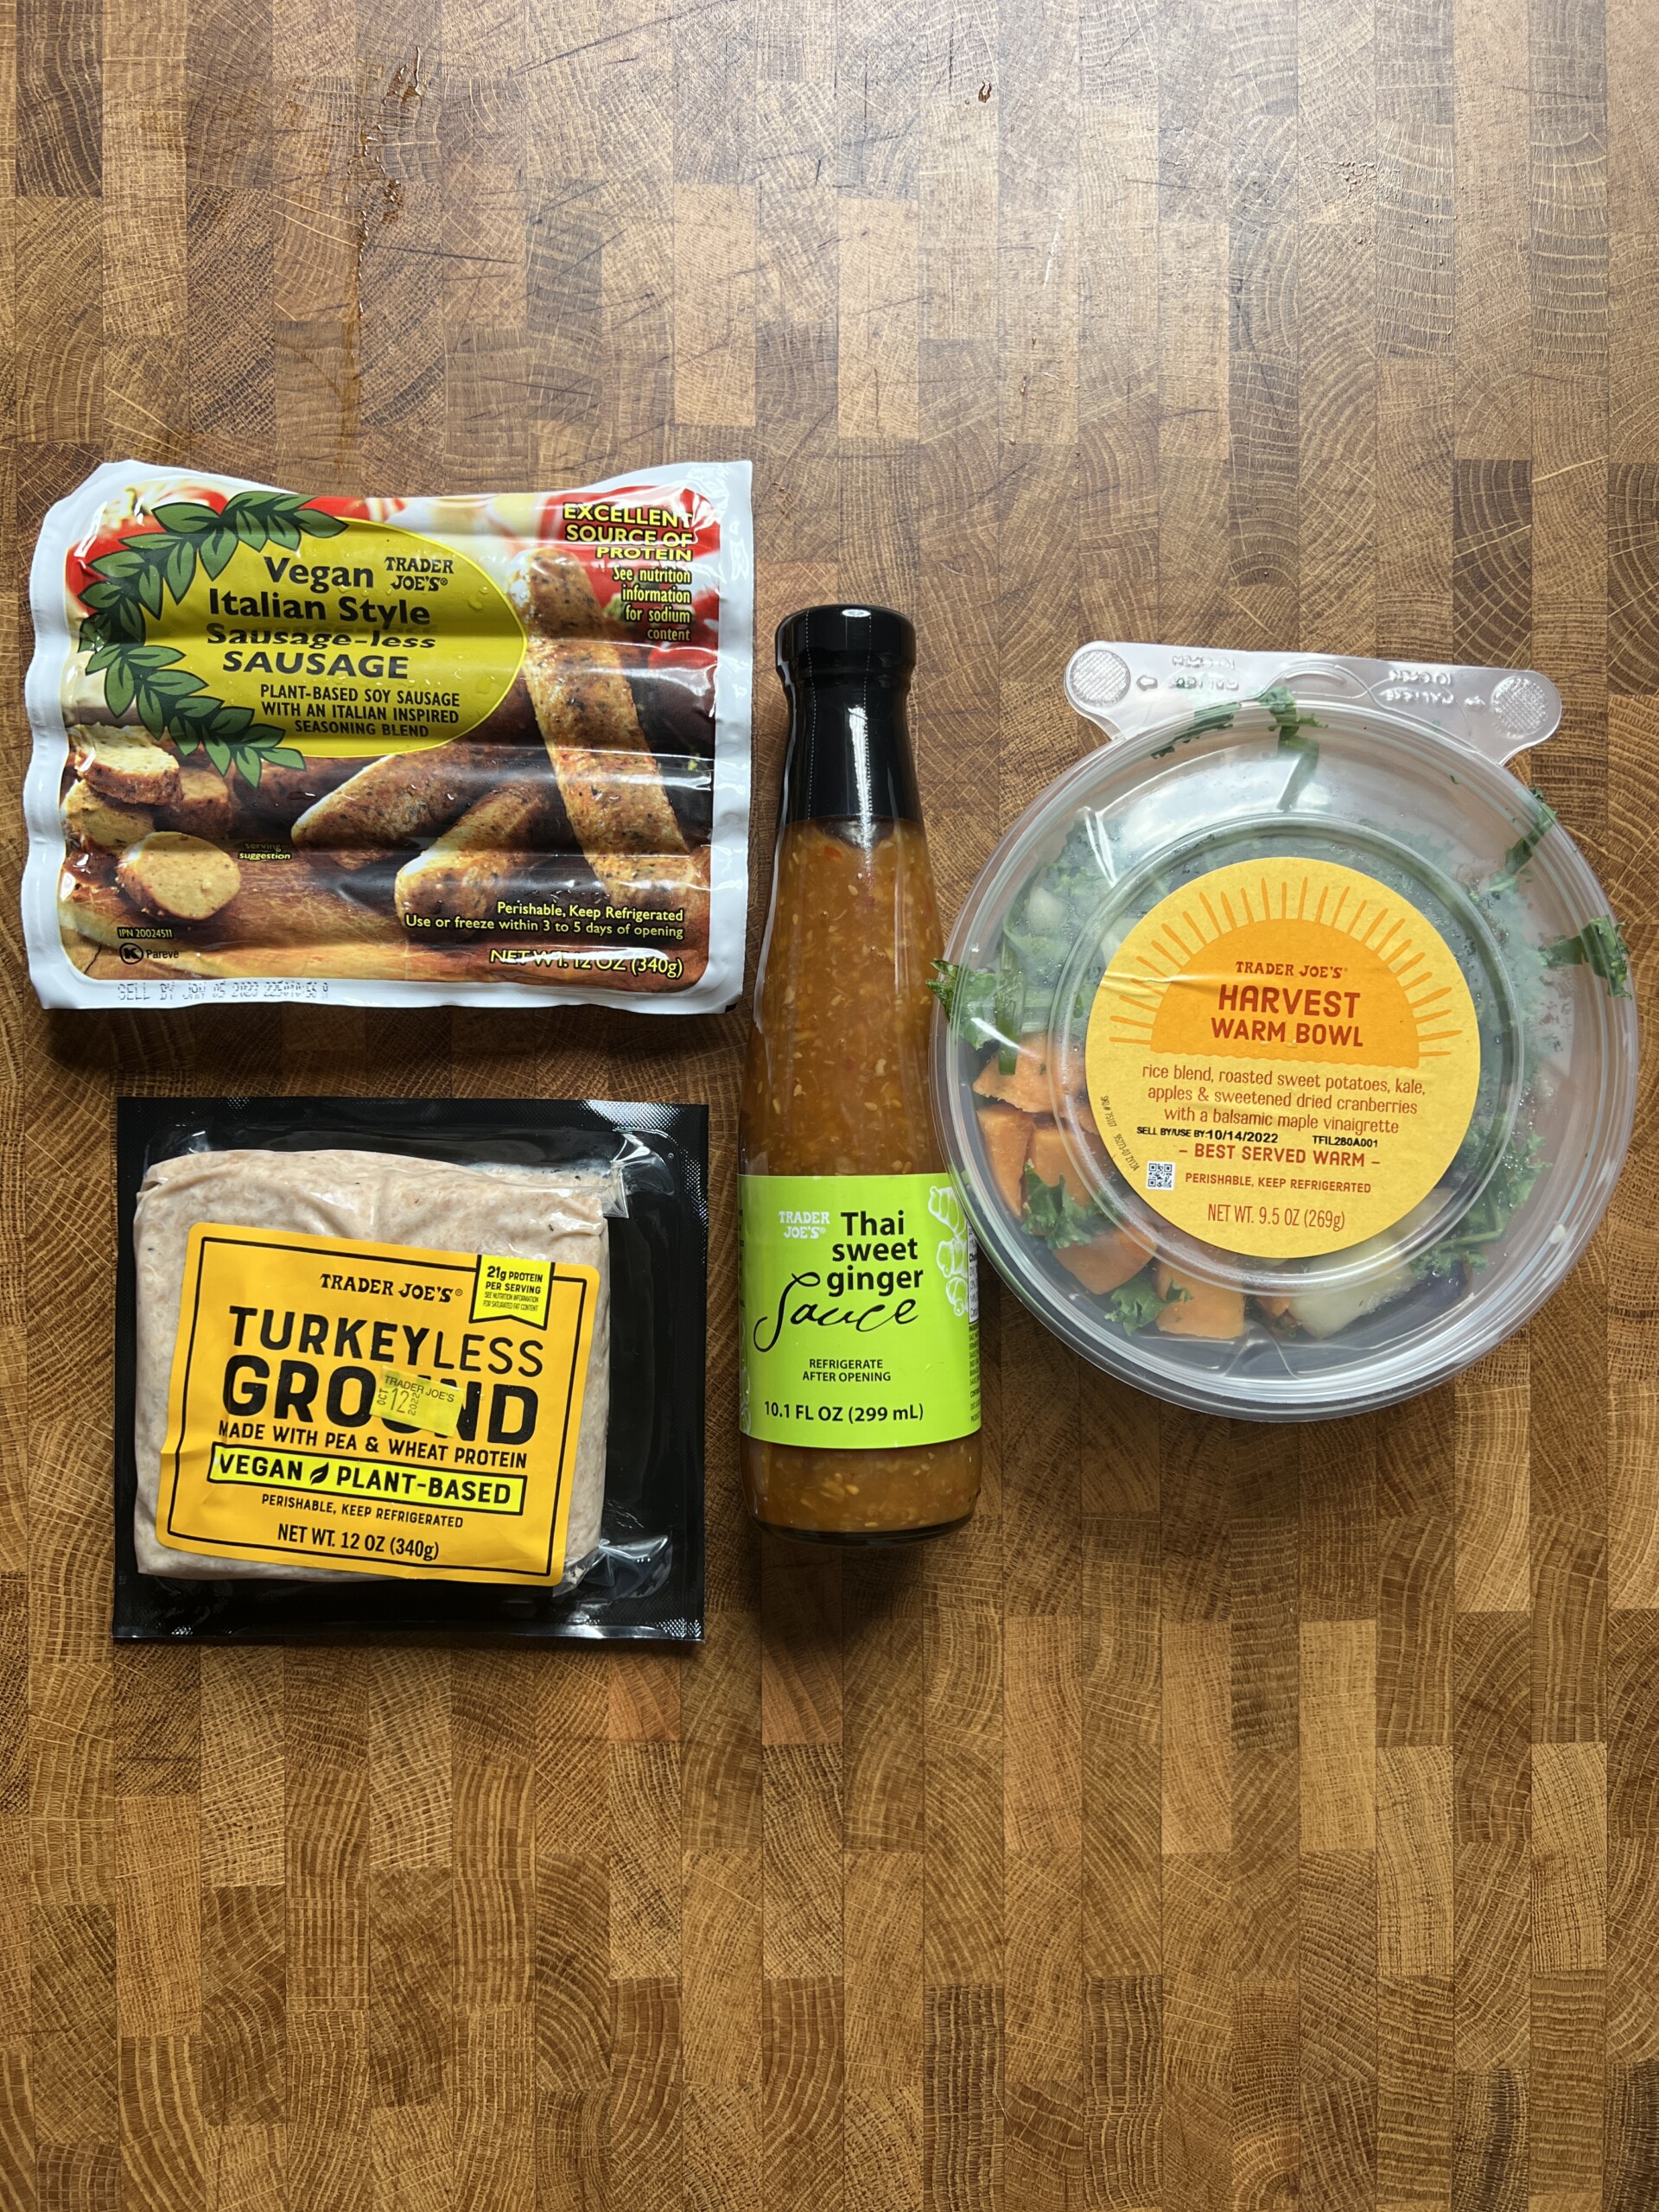 assortment of new vegan meal items at trader joes fall 2022. 